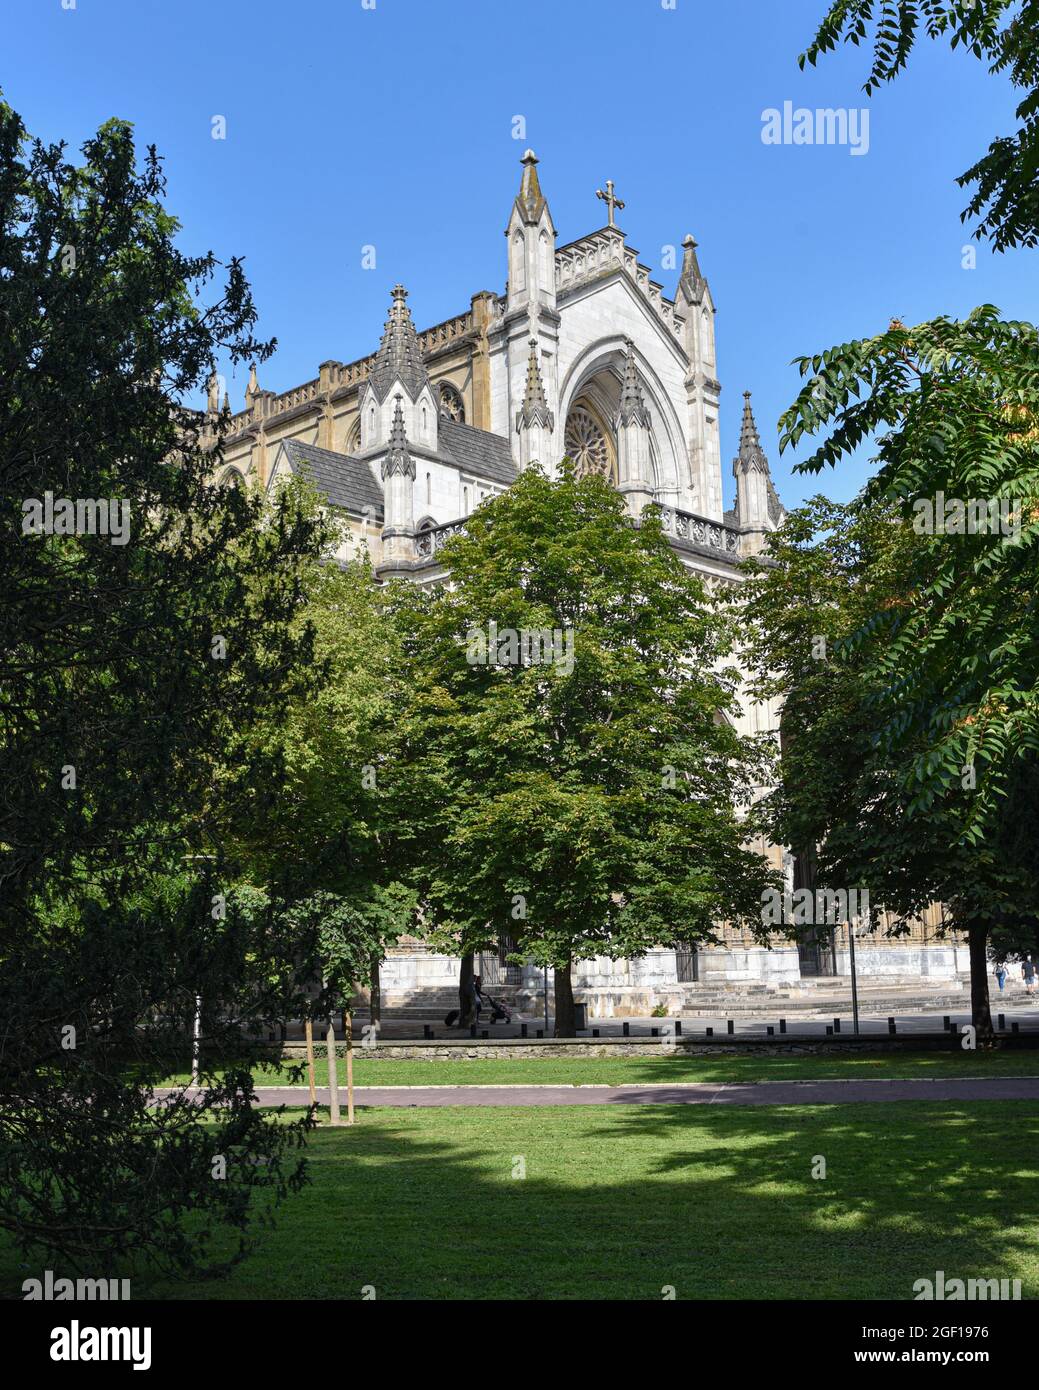 Vitoria-Gasteiz, Spain - 21 Aug, 2021: Exterior Views of the Cathedral of Santa Maria (or New Cathedral) in Vitoria-Gasteiz, Basque Country, Spain Stock Photo